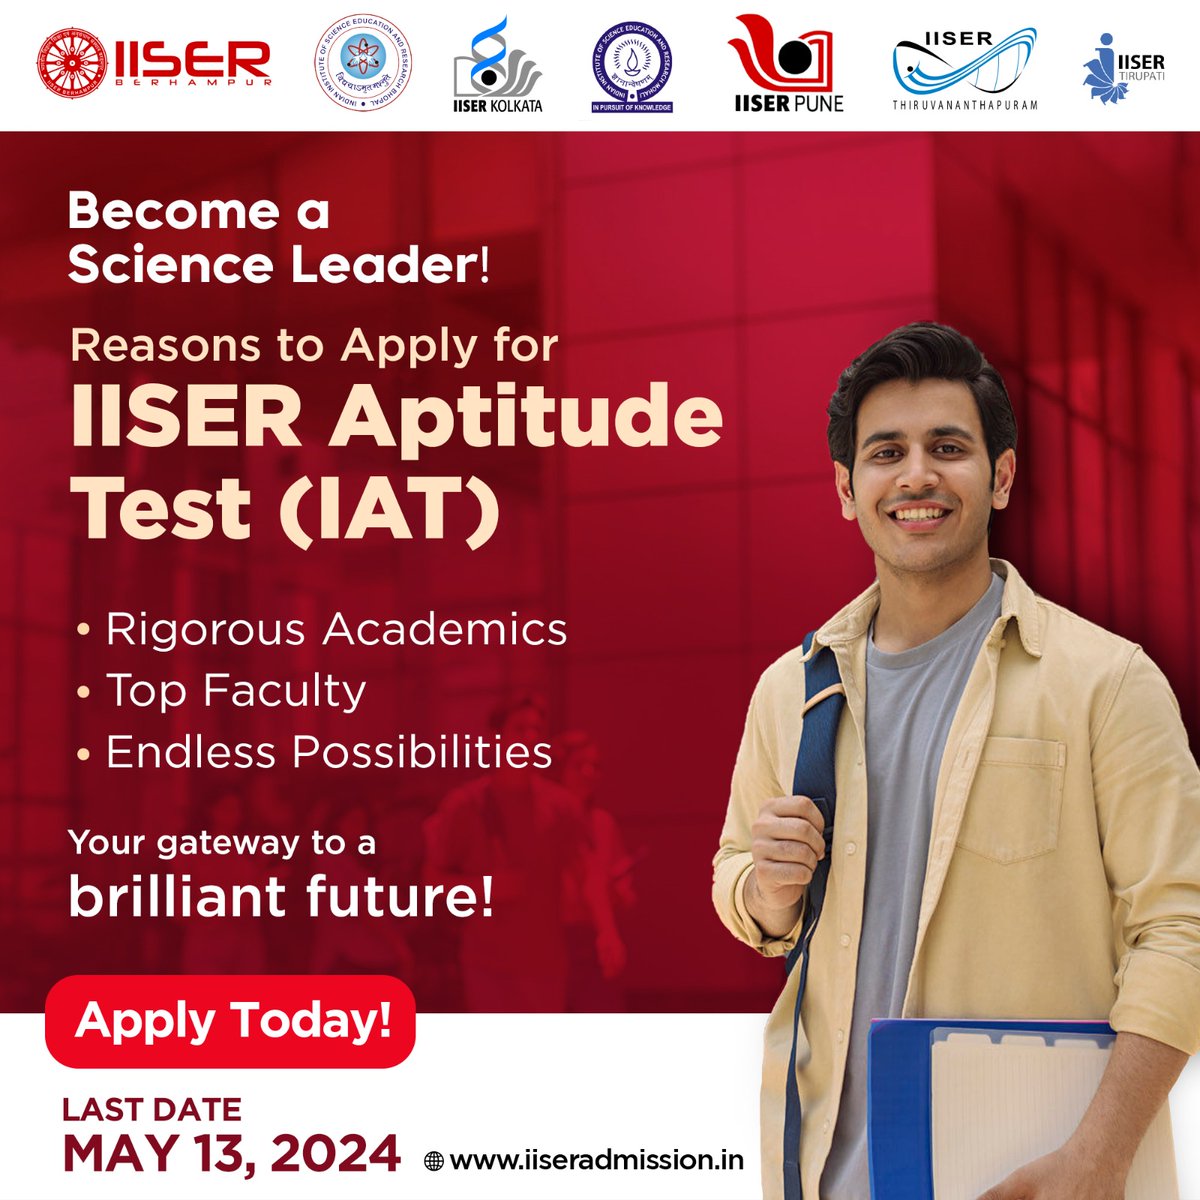 Unleash Your Potential at IISERs! Join a vibrant community of aspiring researchers and shape your future as a scientific innovator. IISER Aptitude Test (IAT) application deadline - May 13, 2024. Visit iiseradmission.in to learn more and embark on your scientific journey